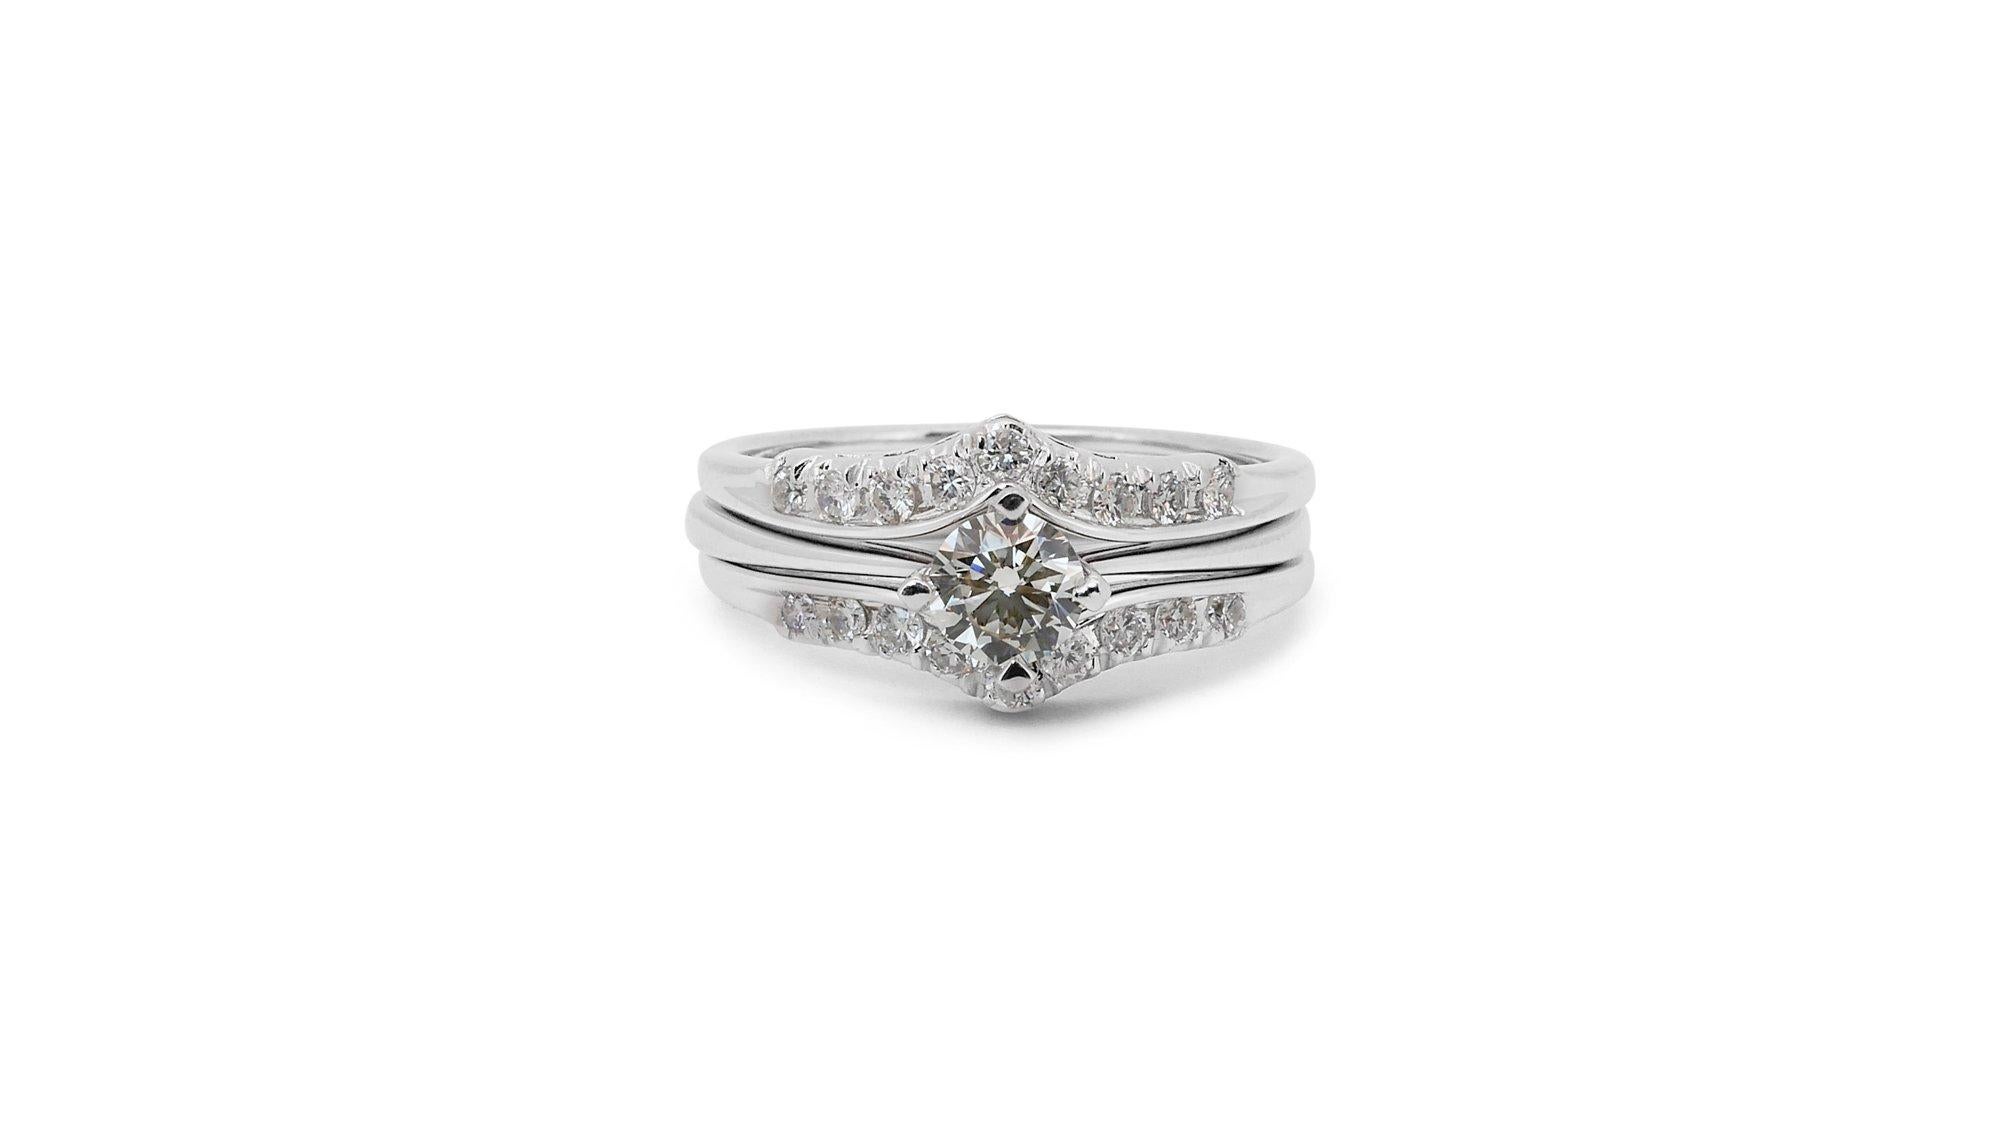 A gorgeous solitaire ring with extra matching with a dazzling 0.4 carat round brilliant natural diamond. It has 0.36 carat of side diamonds which add more to its elegance. The jewelry is made of 18K White Gold with a high quality polish. It comes